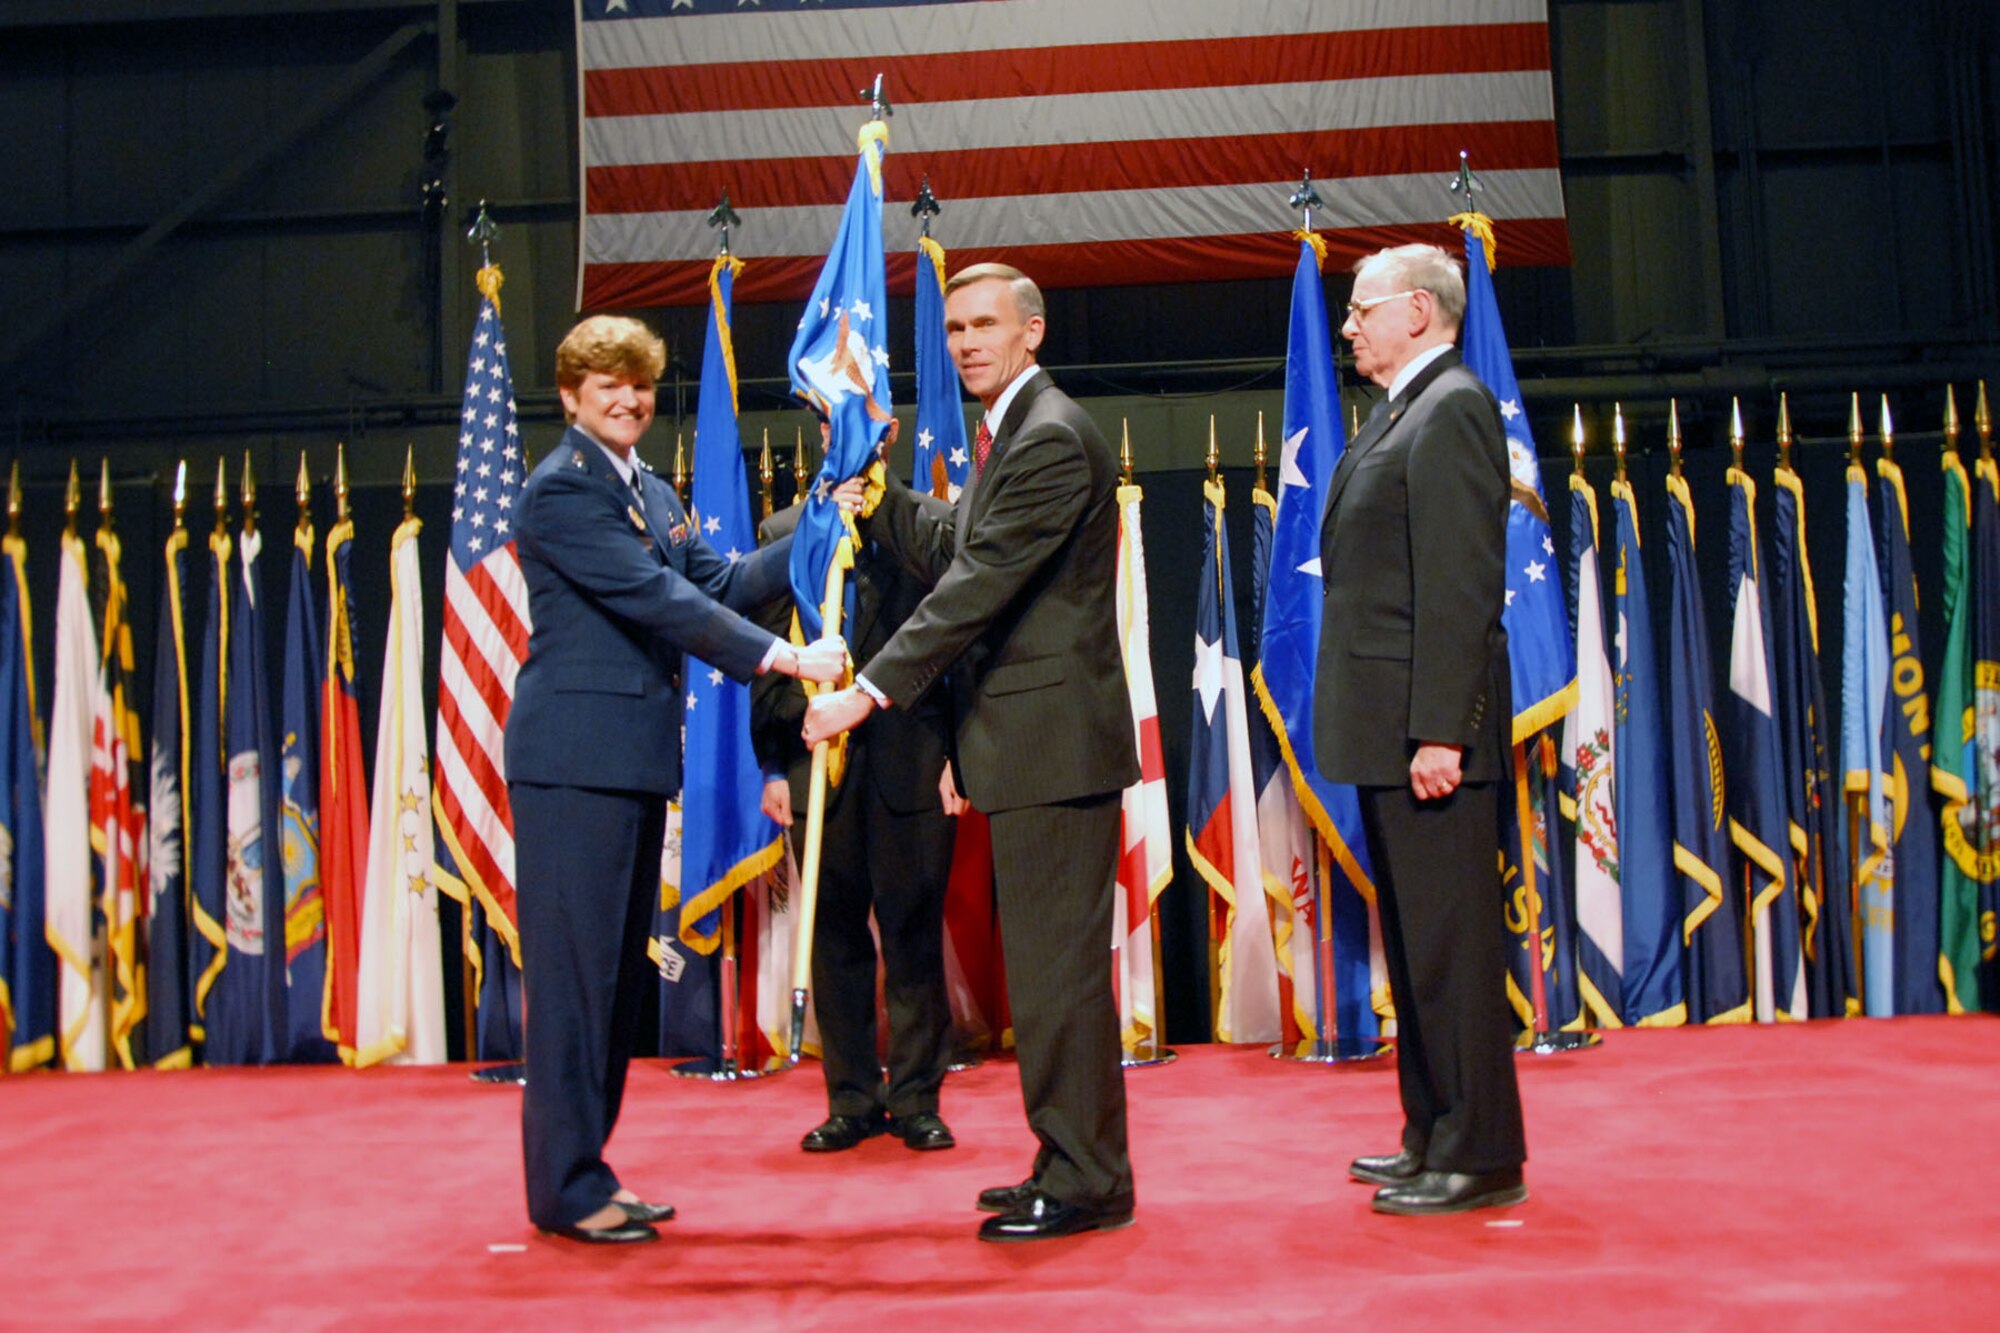 DAYTON, Ohio -- Lt. Gen. (Ret.) John "Jack" L. Hudson (center) became director of the National Museum of the U.S. Air Force during a ceremony on Dec. 16, 2010. Lt. Gen. Janet C. Wolfenbarger (left), vice commander of Air Force Materiel Command, presided over the change of director ceremony. Hudson took the reins from Maj. Gen. (Ret.) Charles D. Metcalf (right) , who is retiring after serving 14 years as museum director. (U.S. Air Force photo by Jeff Fisher)